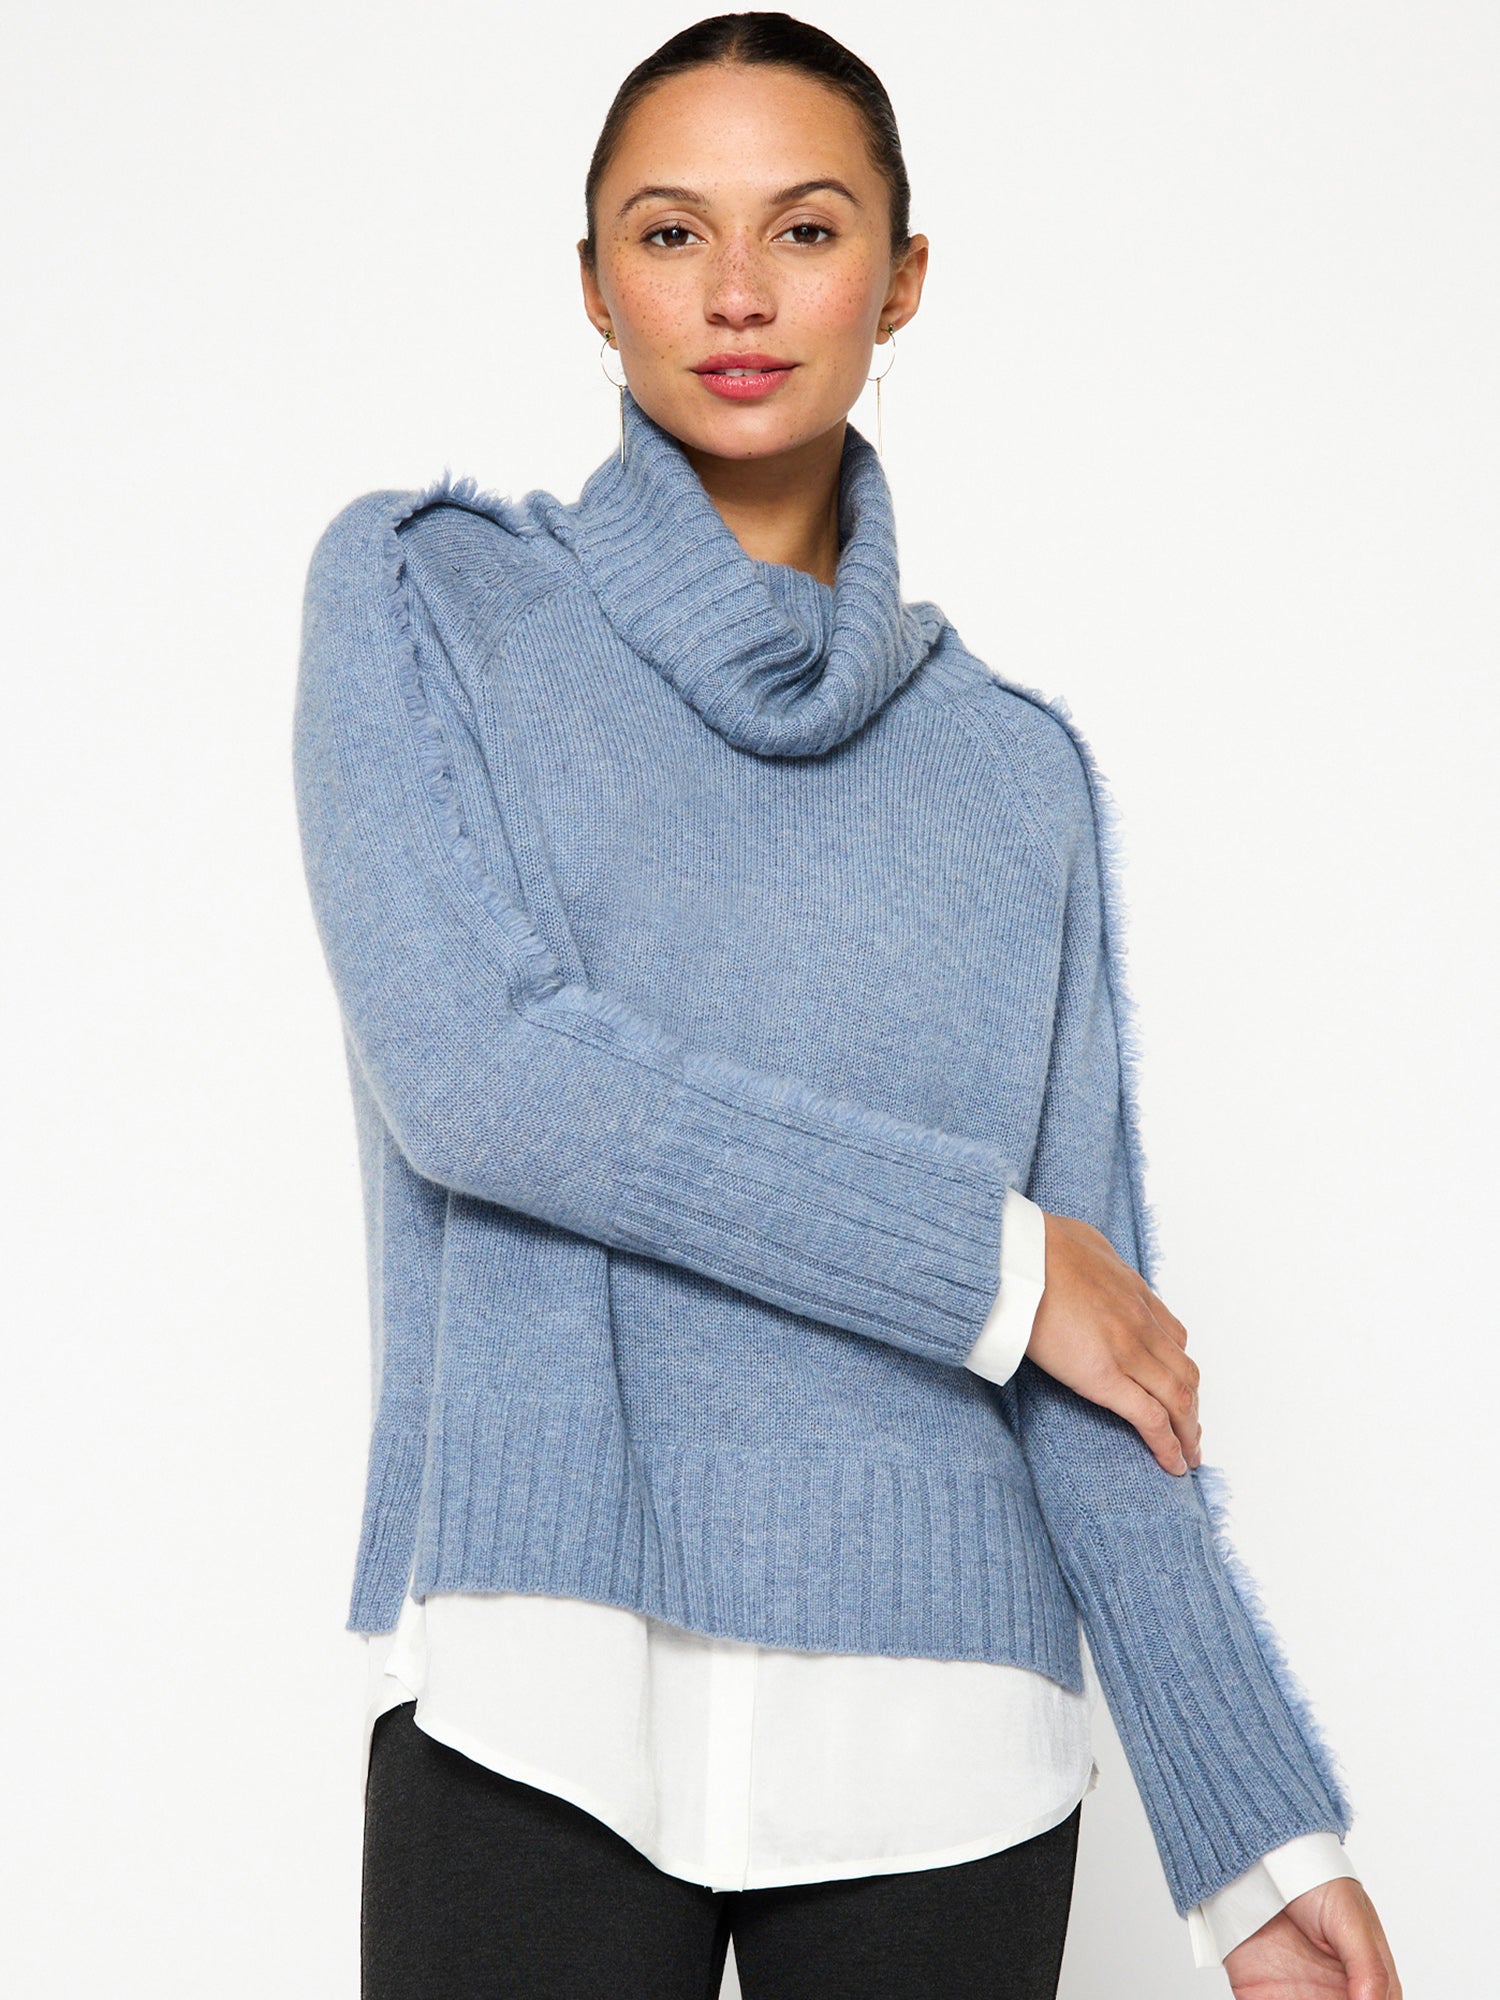 Jolie blue layered turtleneck sweater front view 3